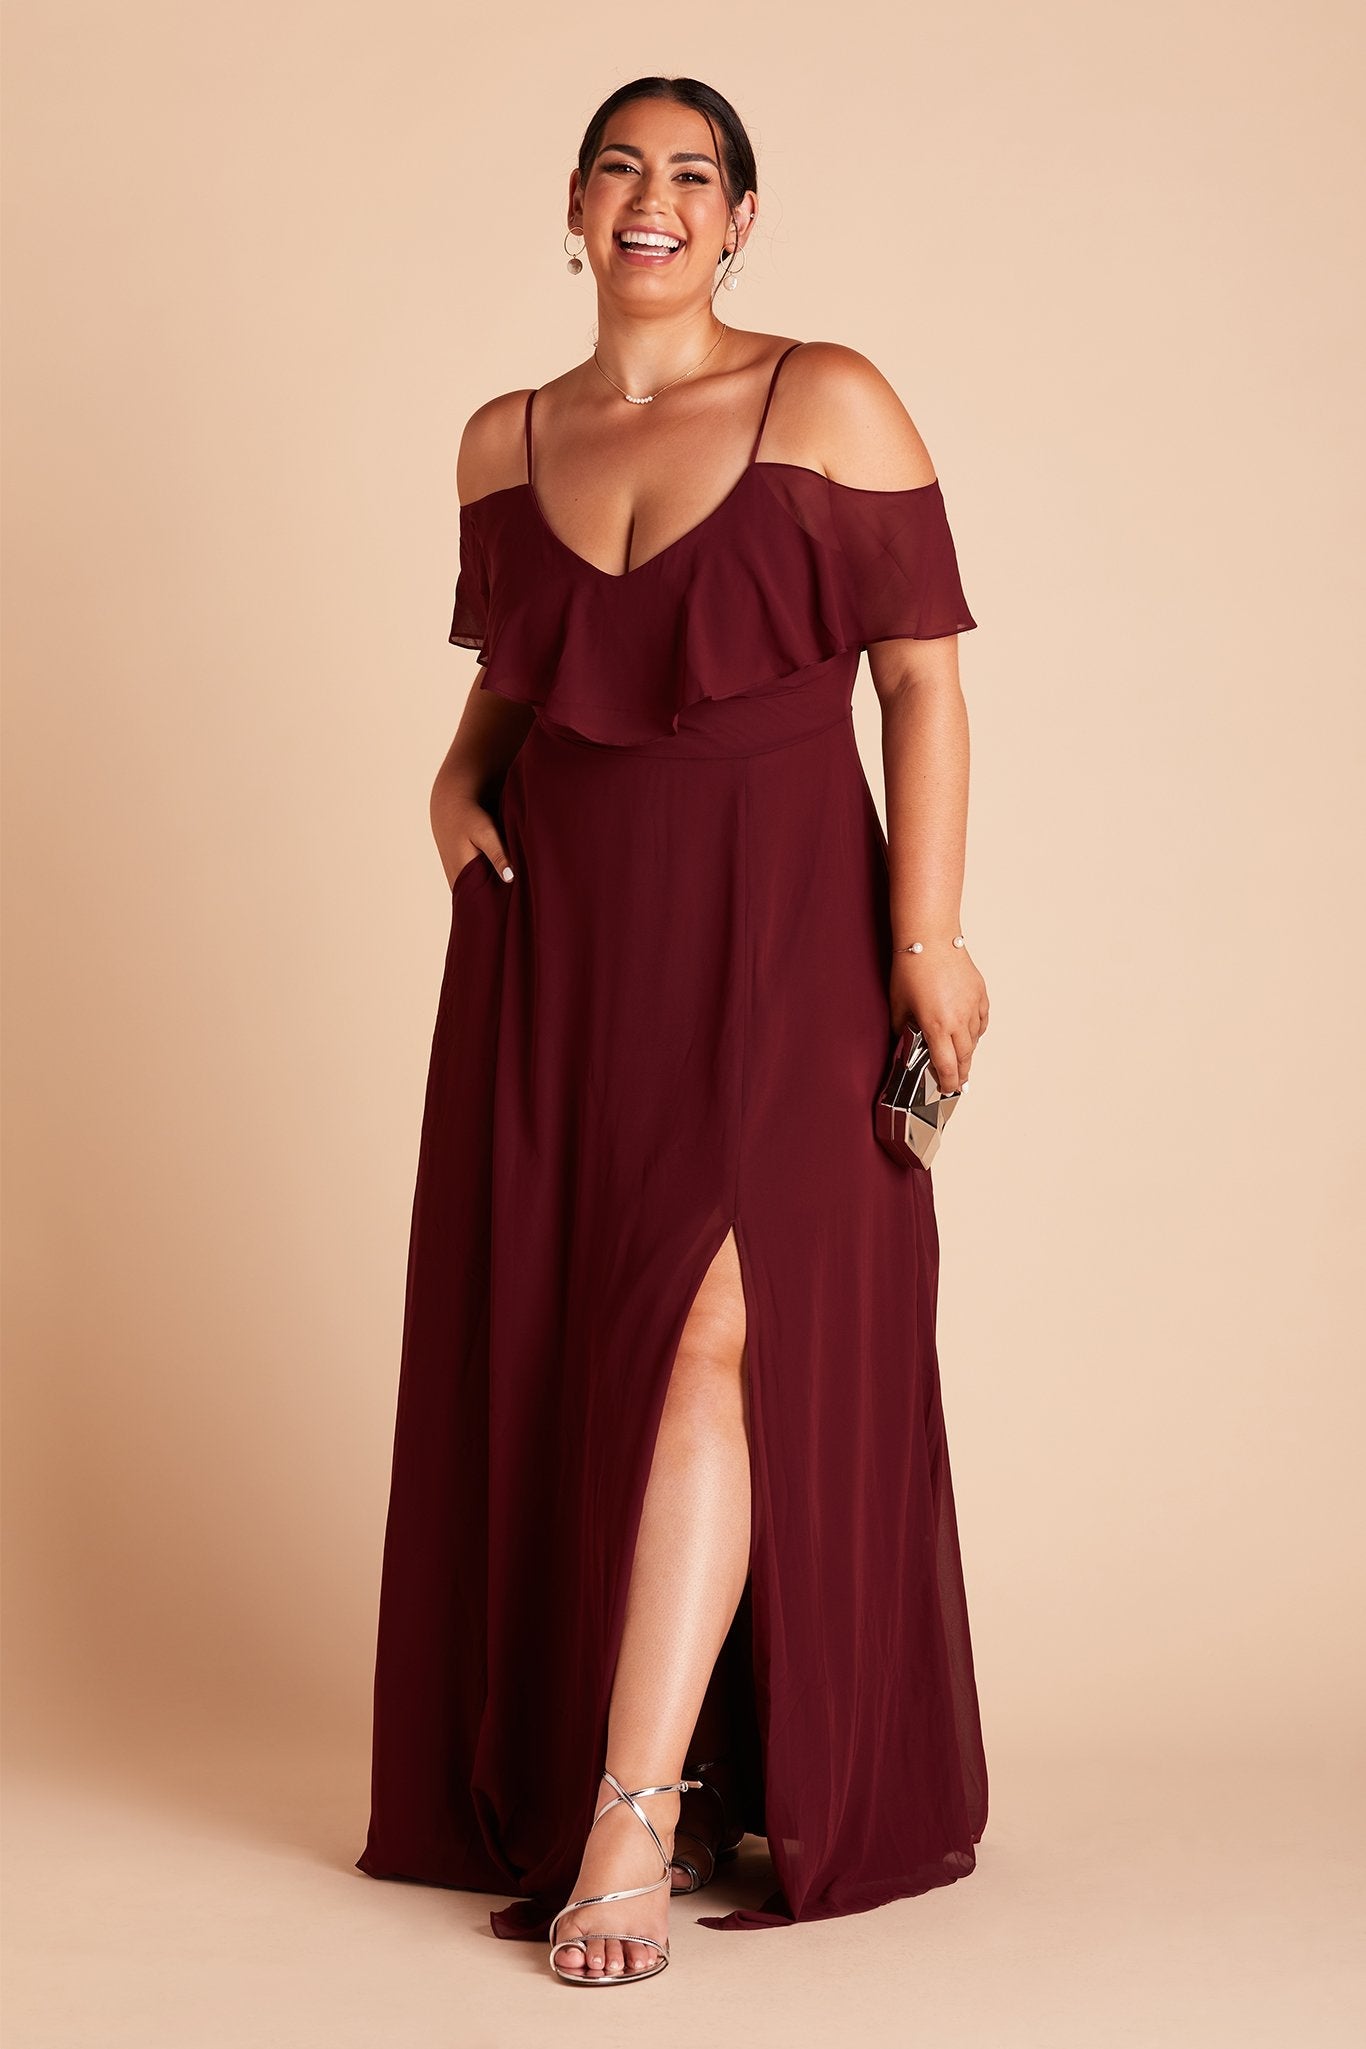 Jane convertible plus size bridesmaid dress with slit in Cabernet Burgundy chiffon by Birdy Grey, front view with hand in pocket